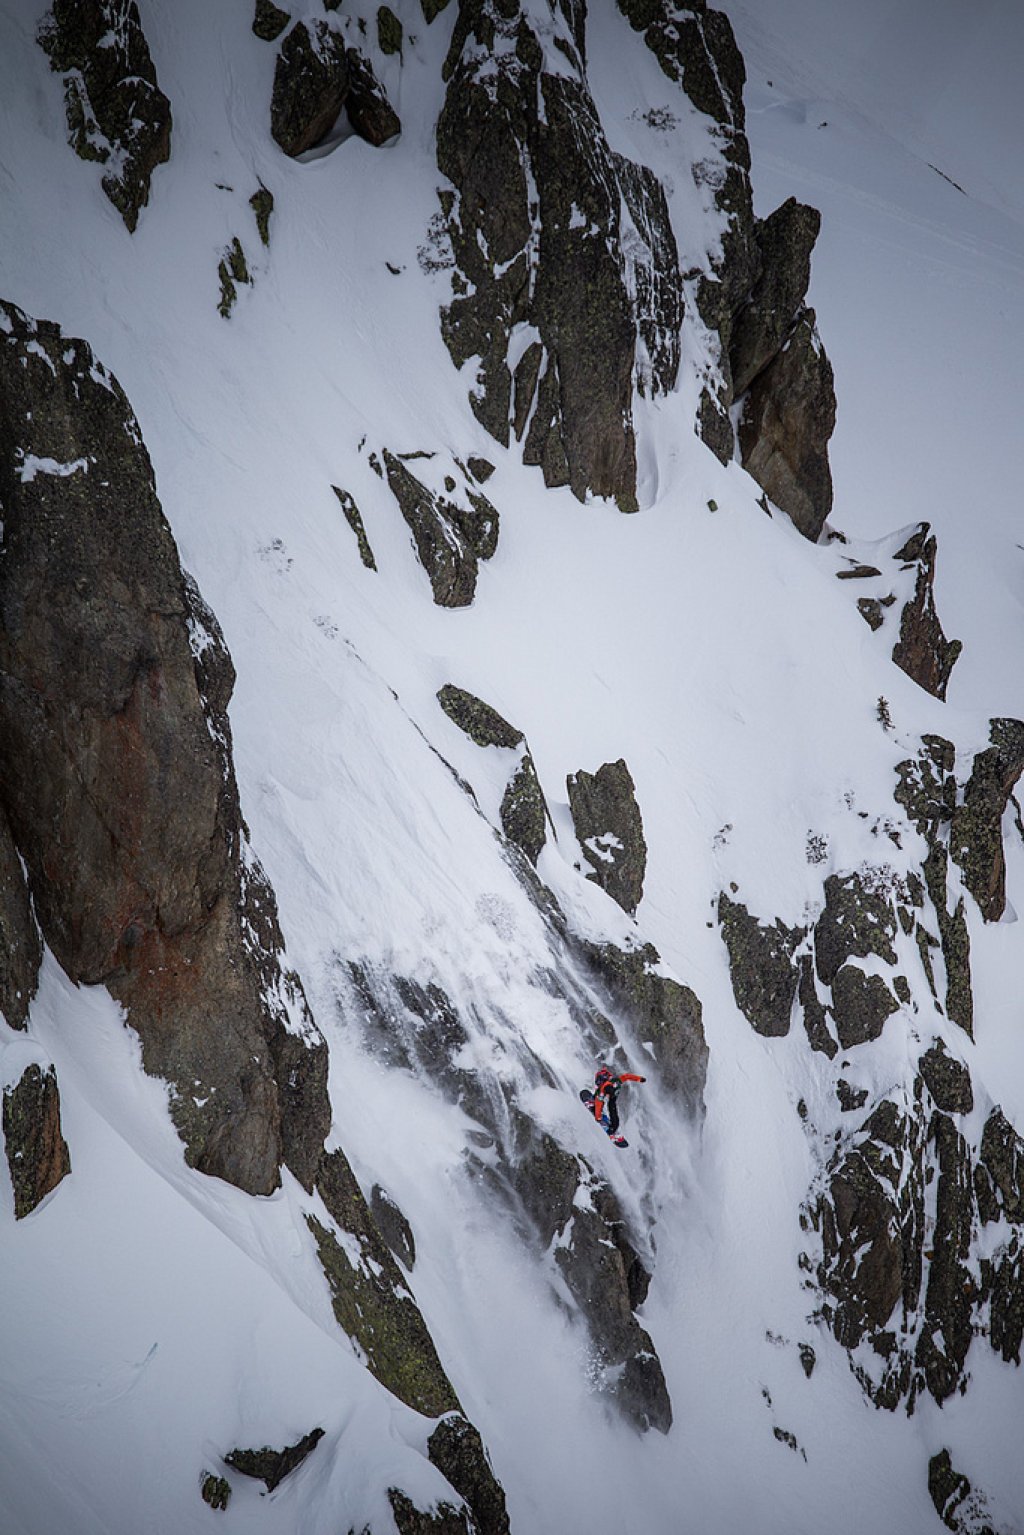 Lots of snow and many cliffs in the freeride mecca.